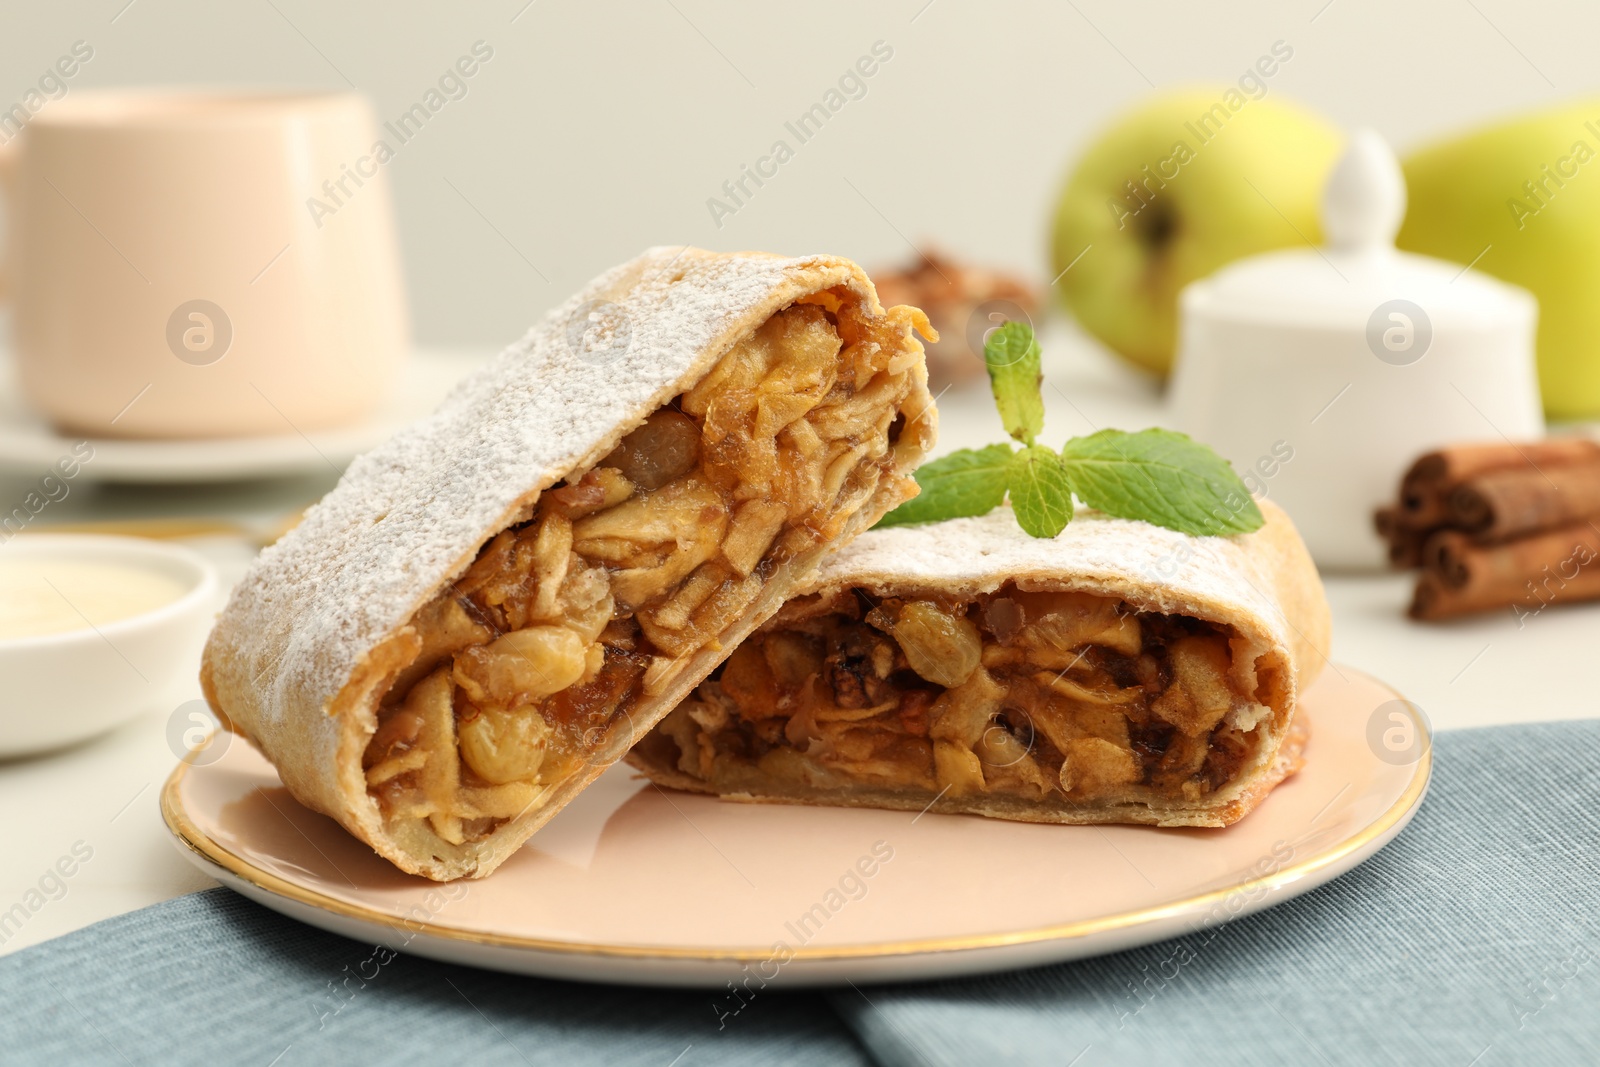 Photo of Delicious strudel with apples, nuts and raisins on table, closeup